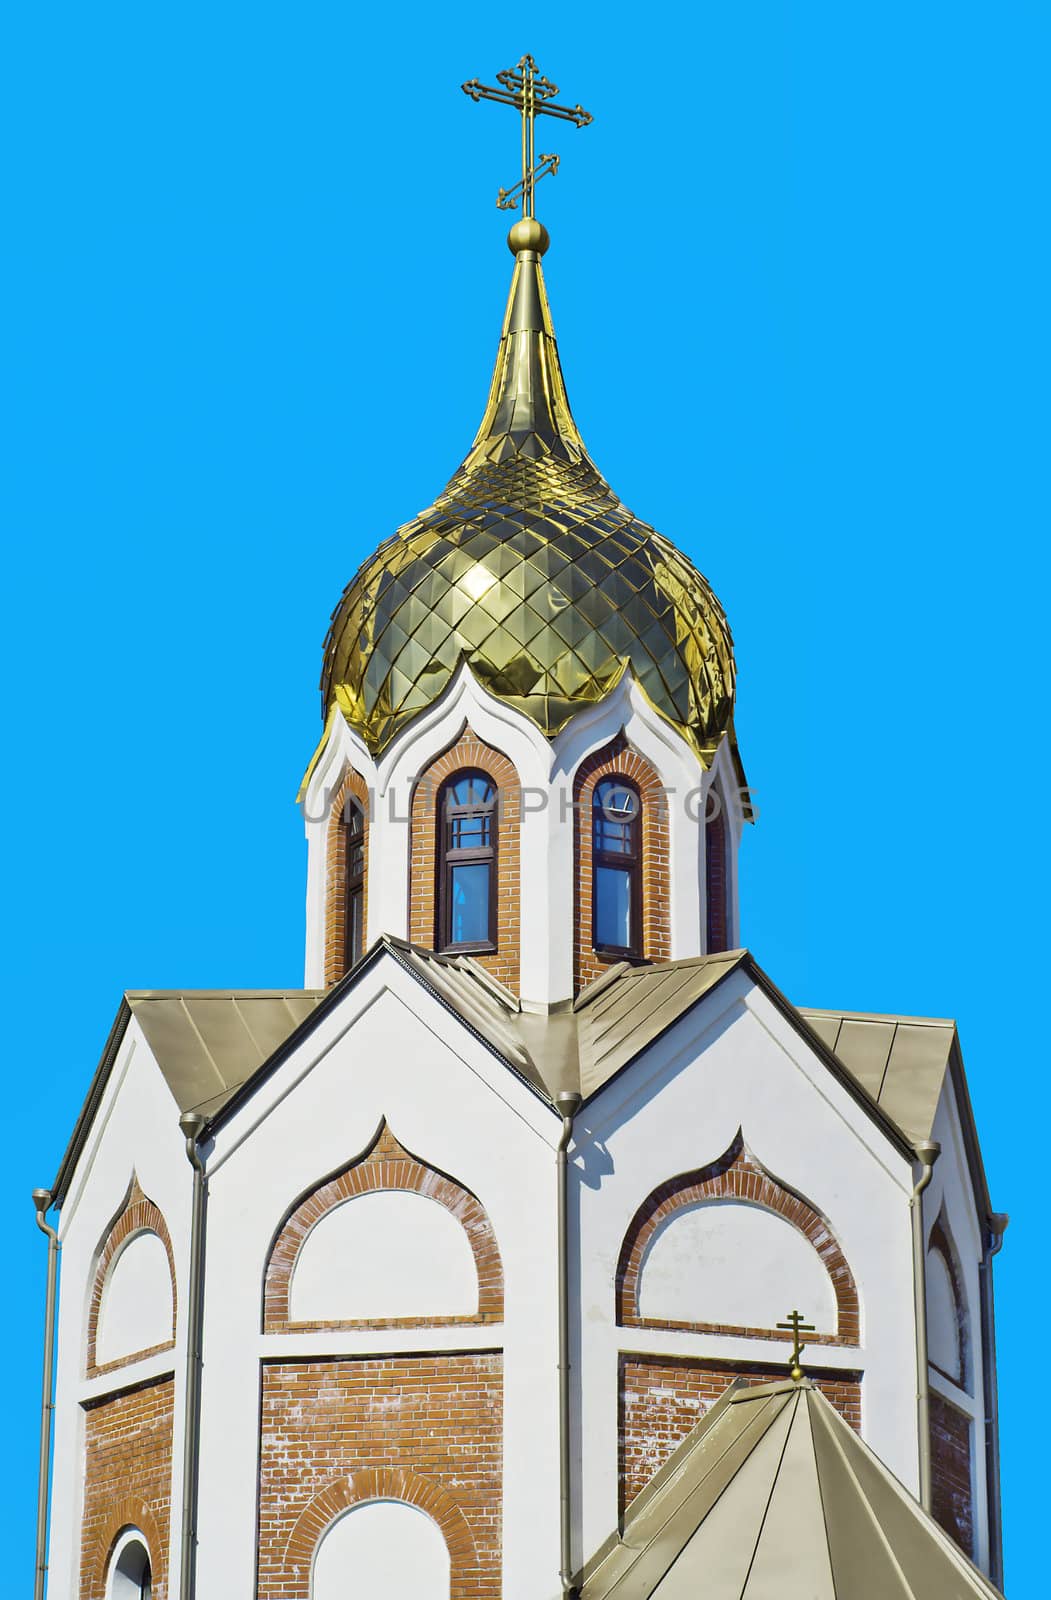 Dome of orthodox church against the blue sky